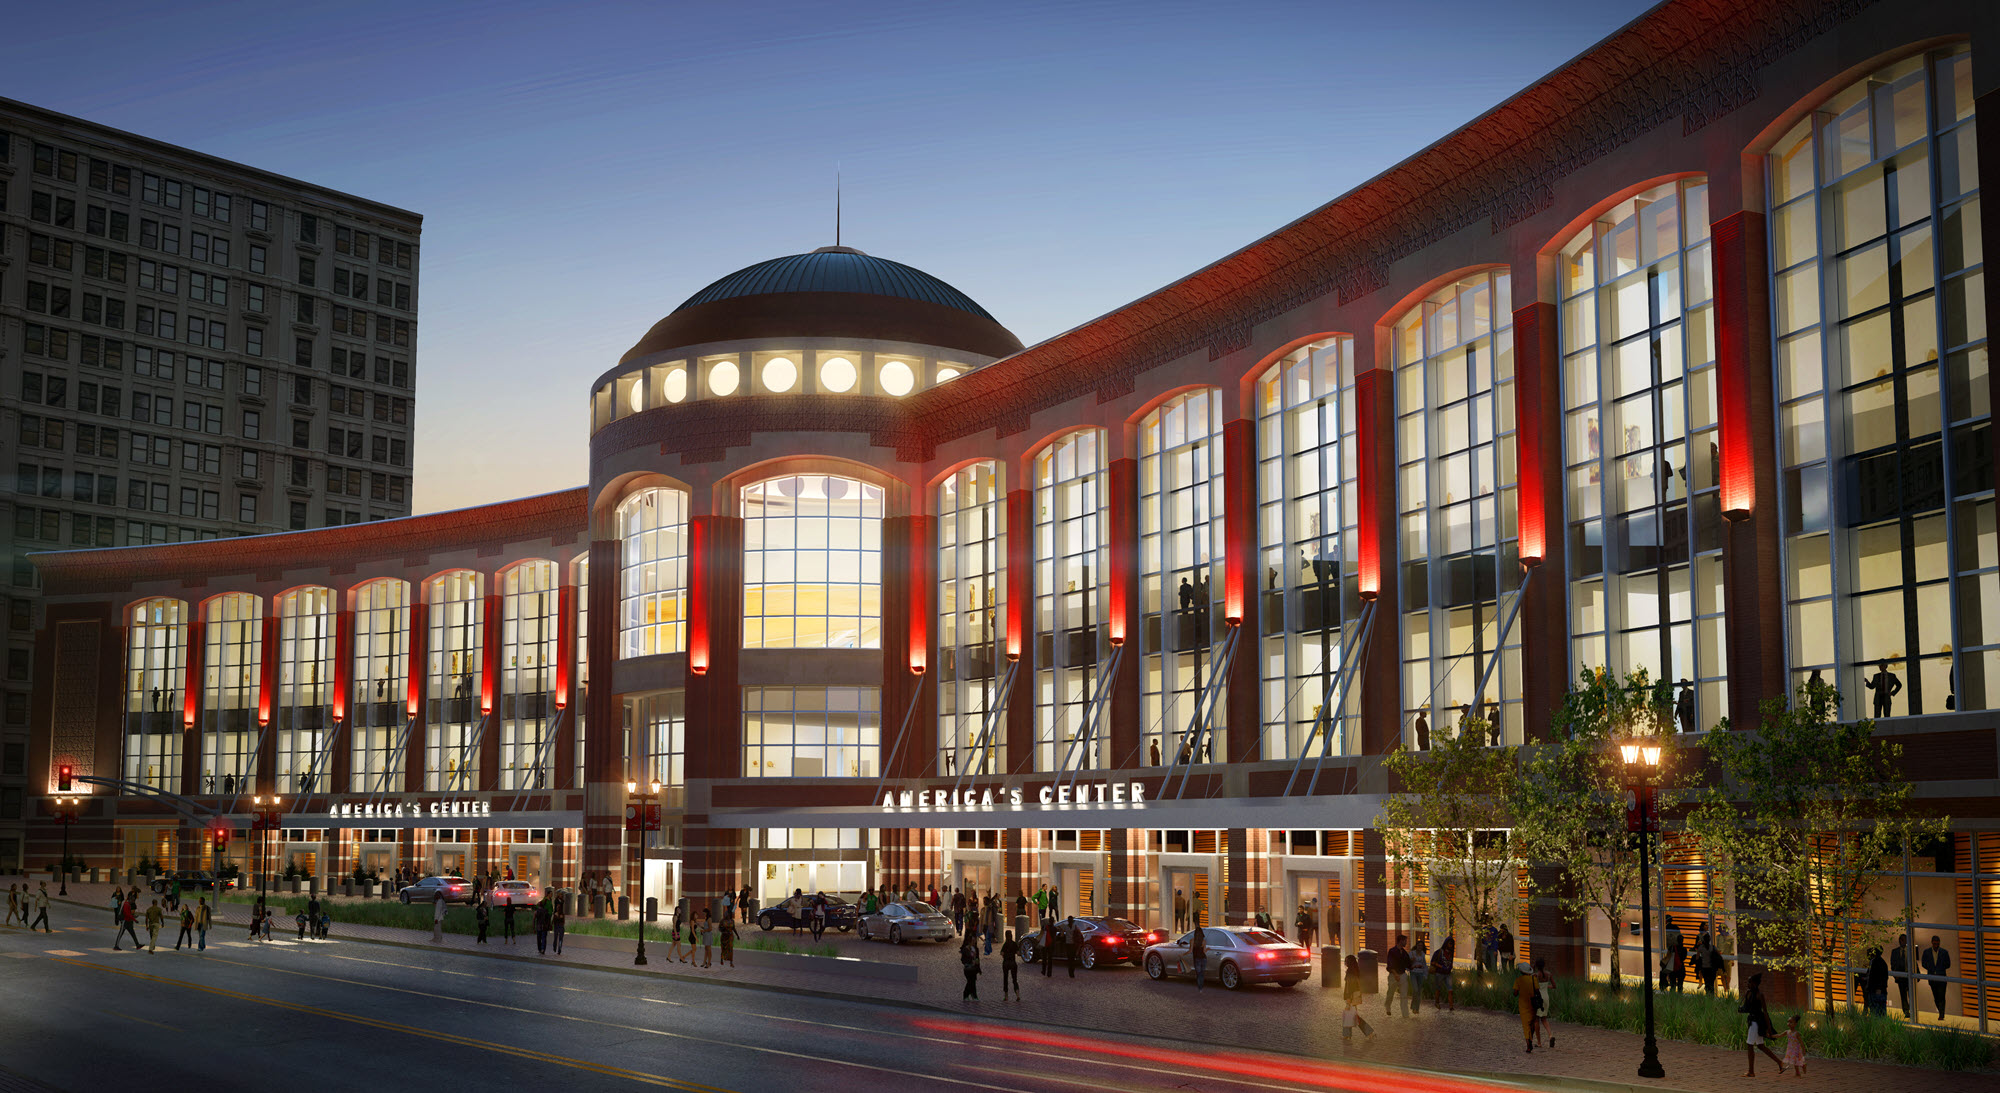 A rendering of the Washington Avenue Entrance to America's Center Convention Complex.